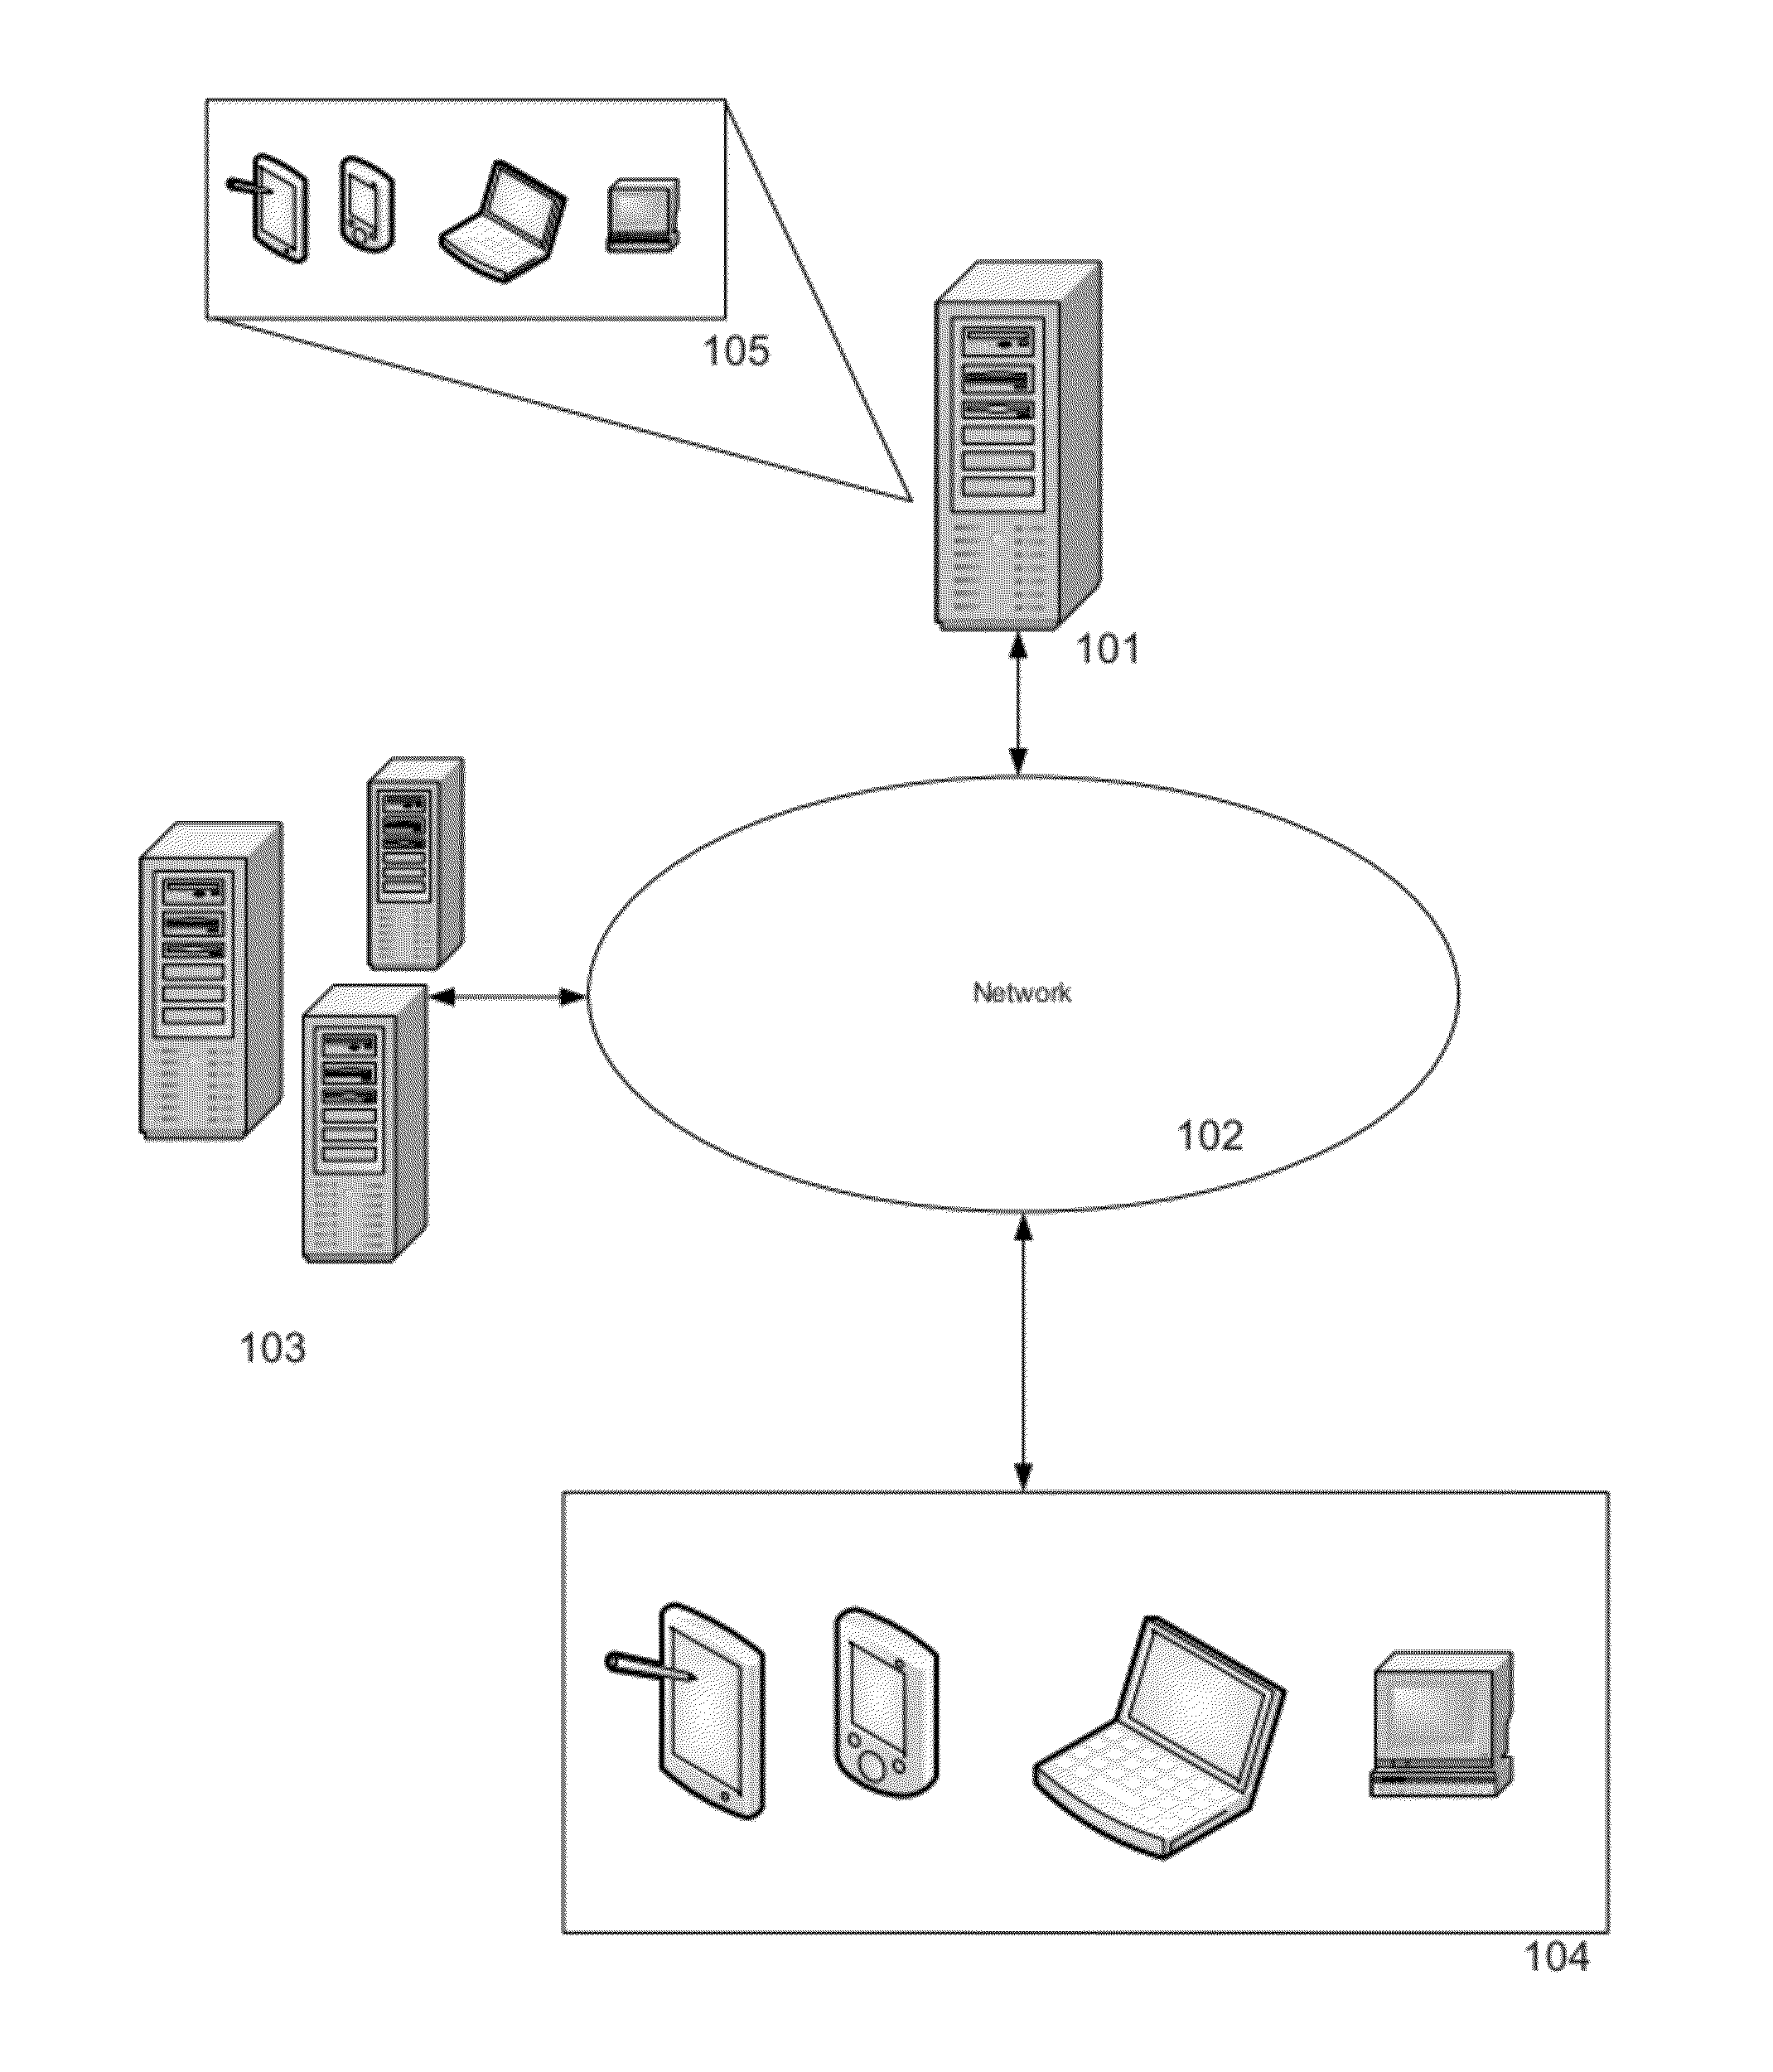 System and method for providing an interactive remote controlled jukebox